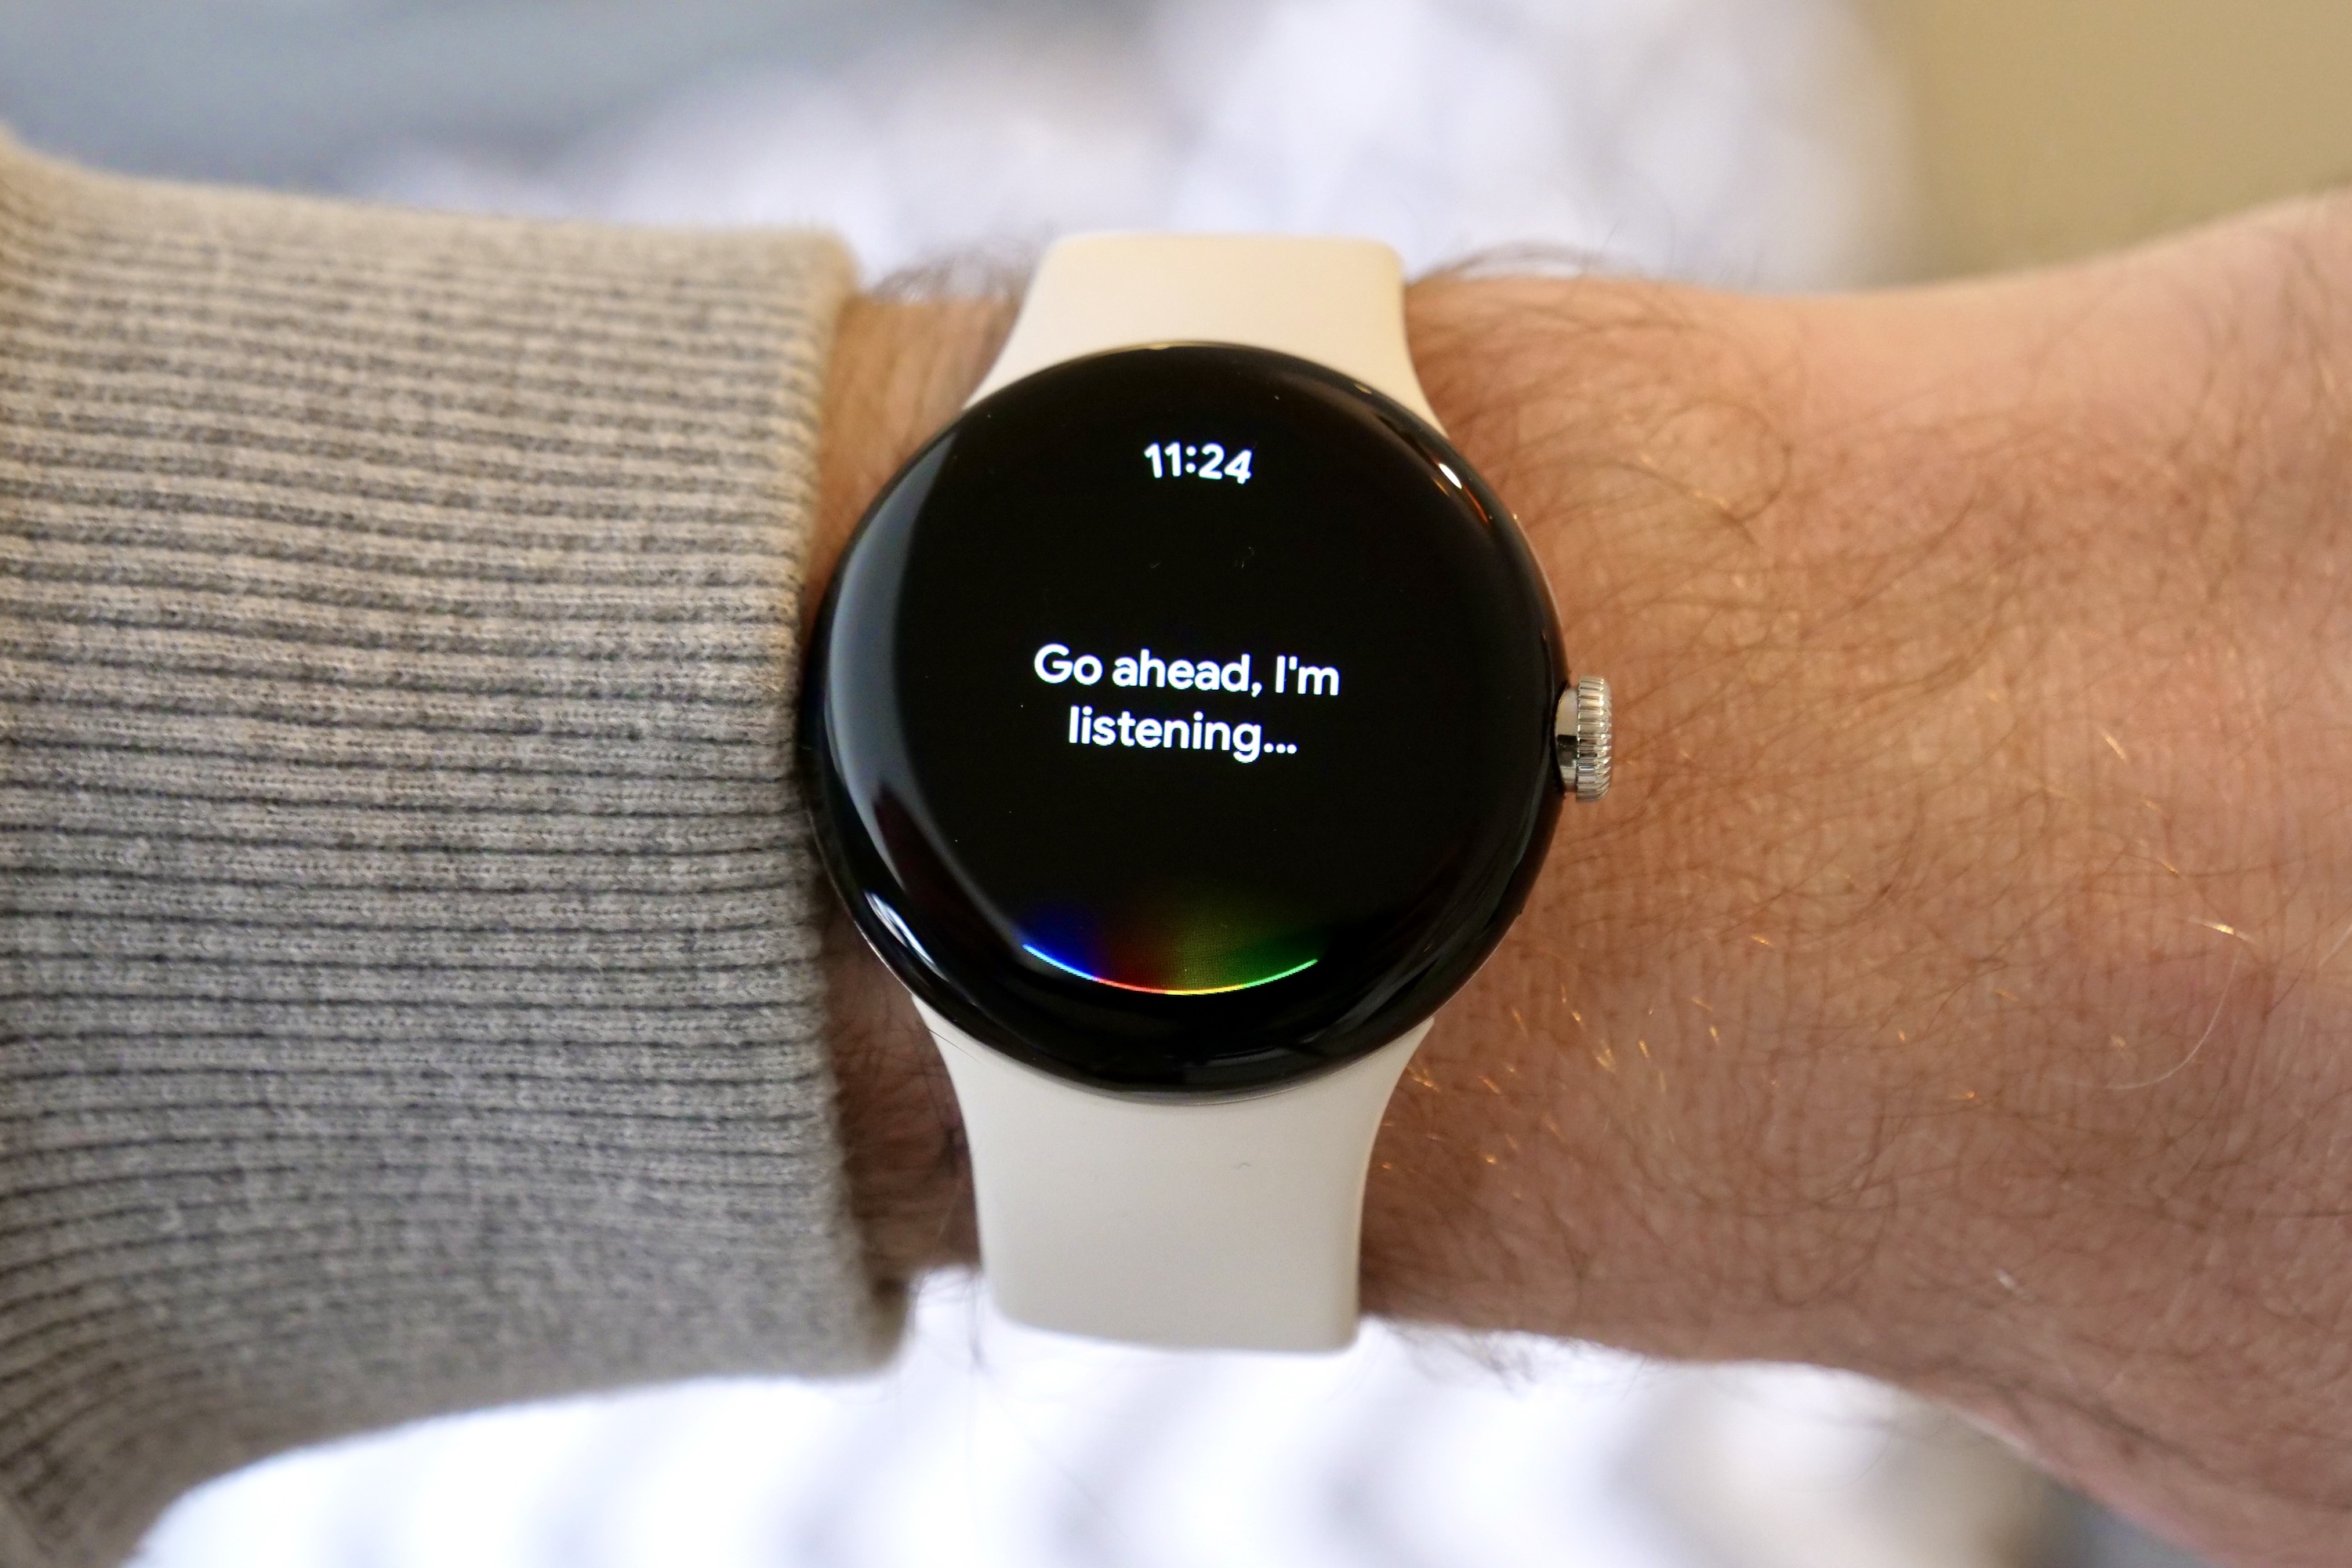 No, you really don’t need Google Assistant on your smartwatch